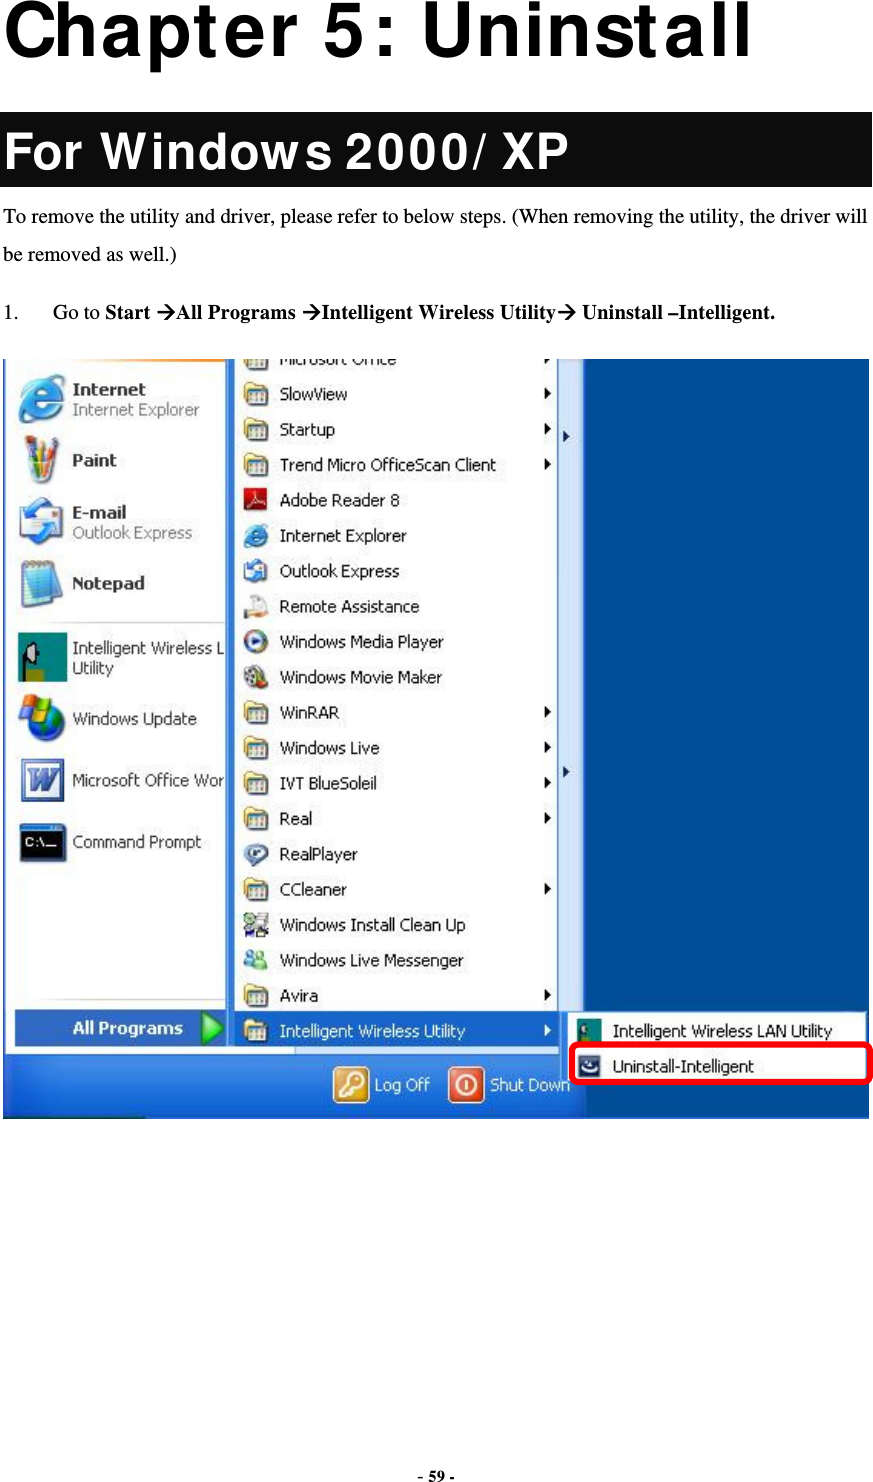  - 59 -  Chapter 5: Uninstall For Windows 2000/ XP To remove the utility and driver, please refer to below steps. (When removing the utility, the driver will be removed as well.) 1. Go to Start All Programs Intelligent Wireless Utility Uninstall –Intelligent.  